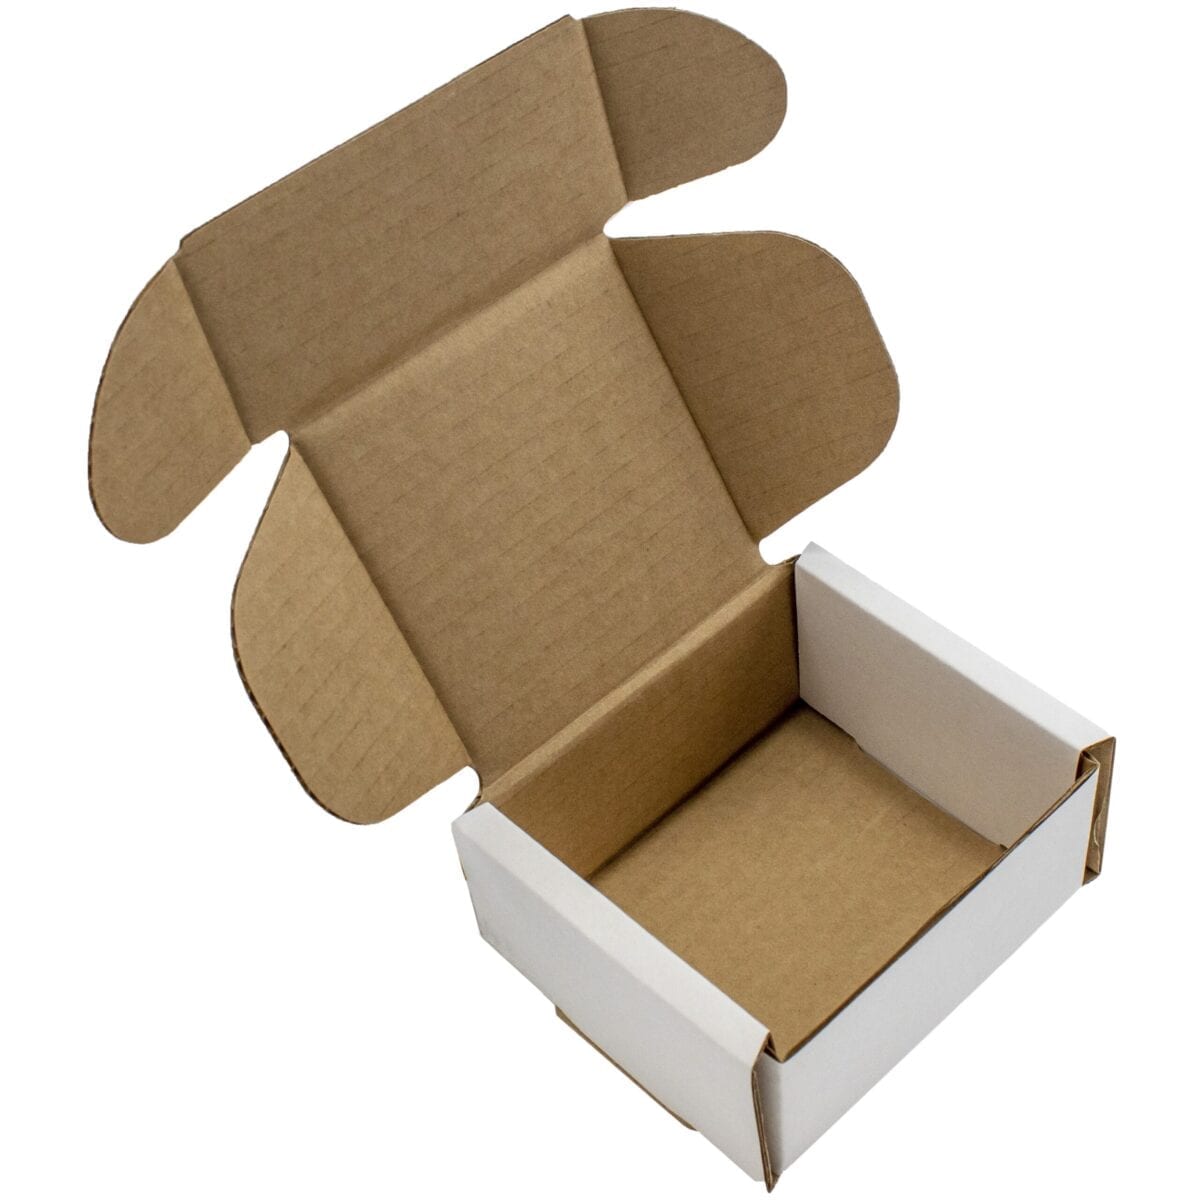 Buy 90x90x50mm White Mailing Box | Packaging Supplies